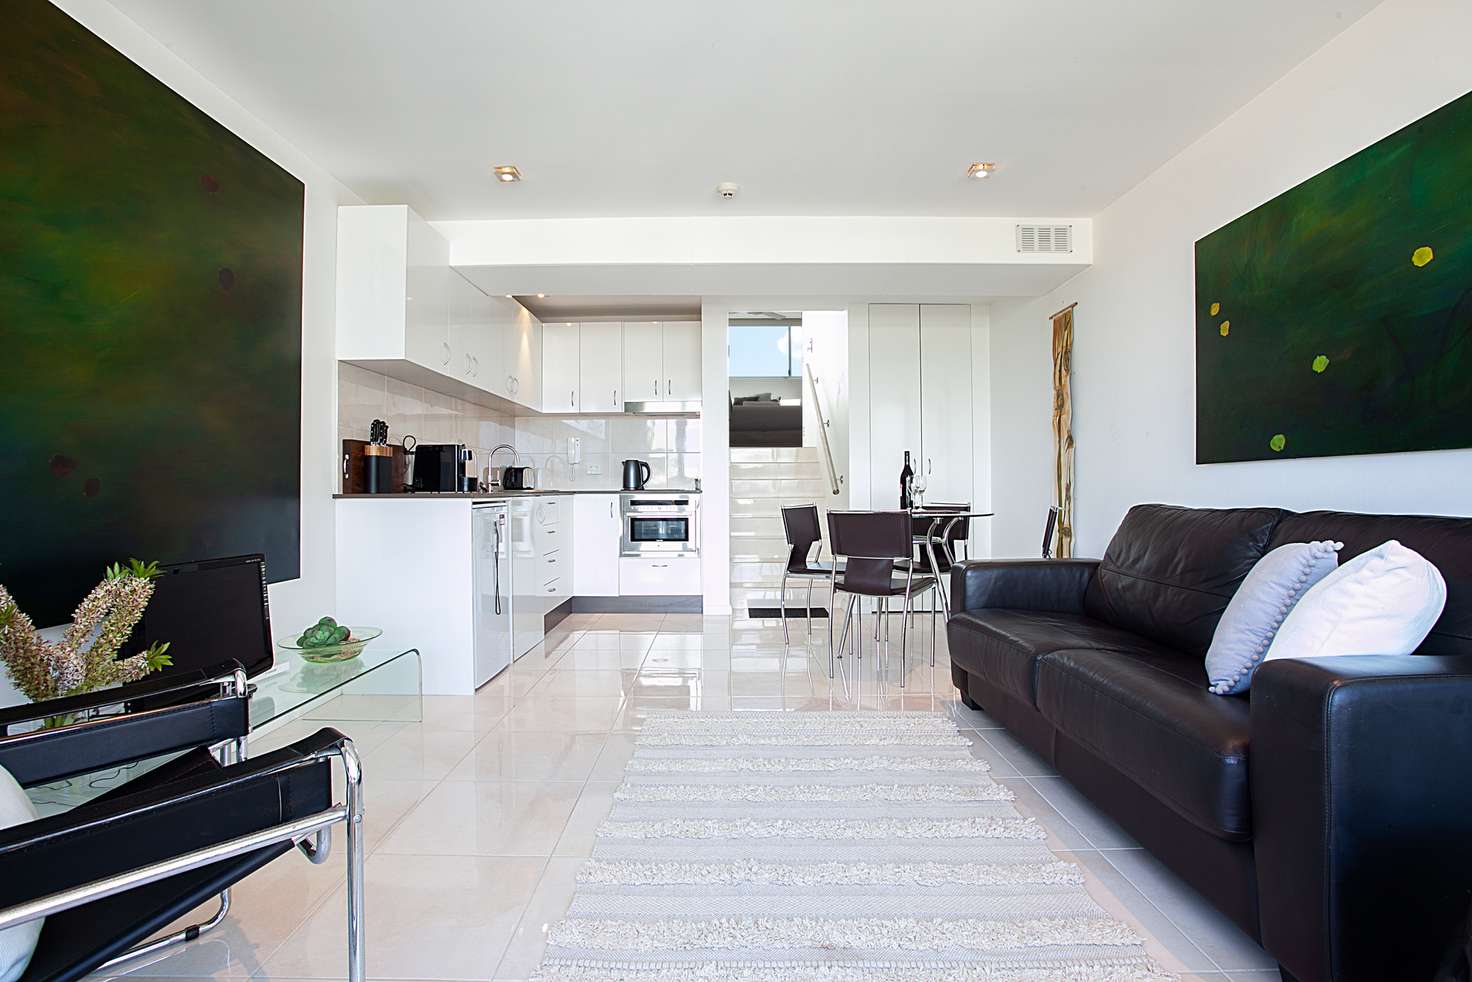 Main view of Homely apartment listing, 705/22 Central Avenue, Manly NSW 2095